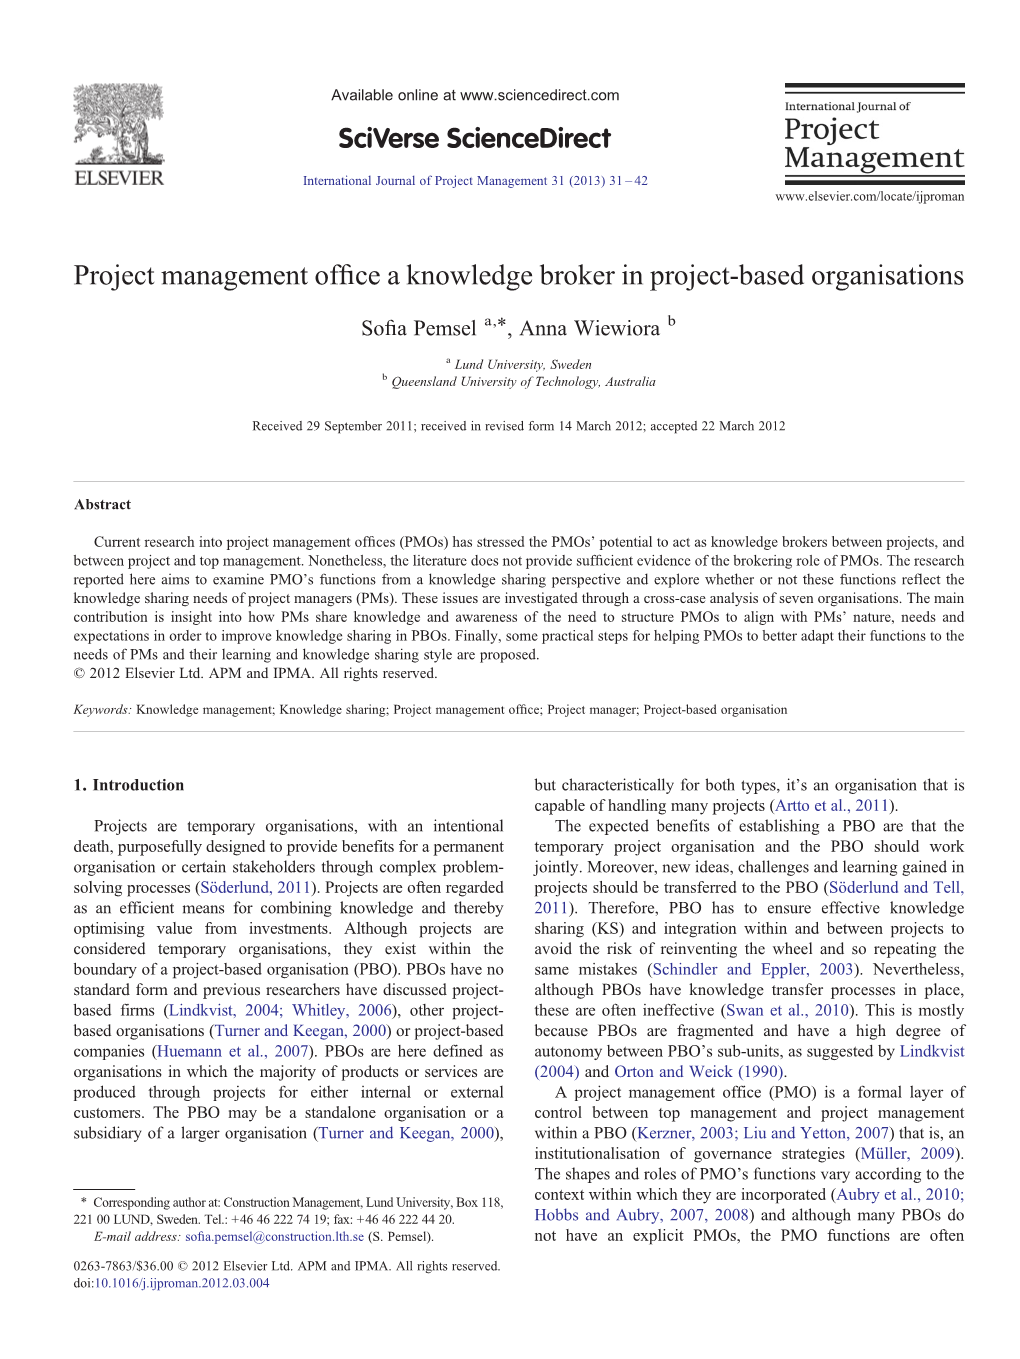 Project Management Office a Knowledge Broker in Project-Based